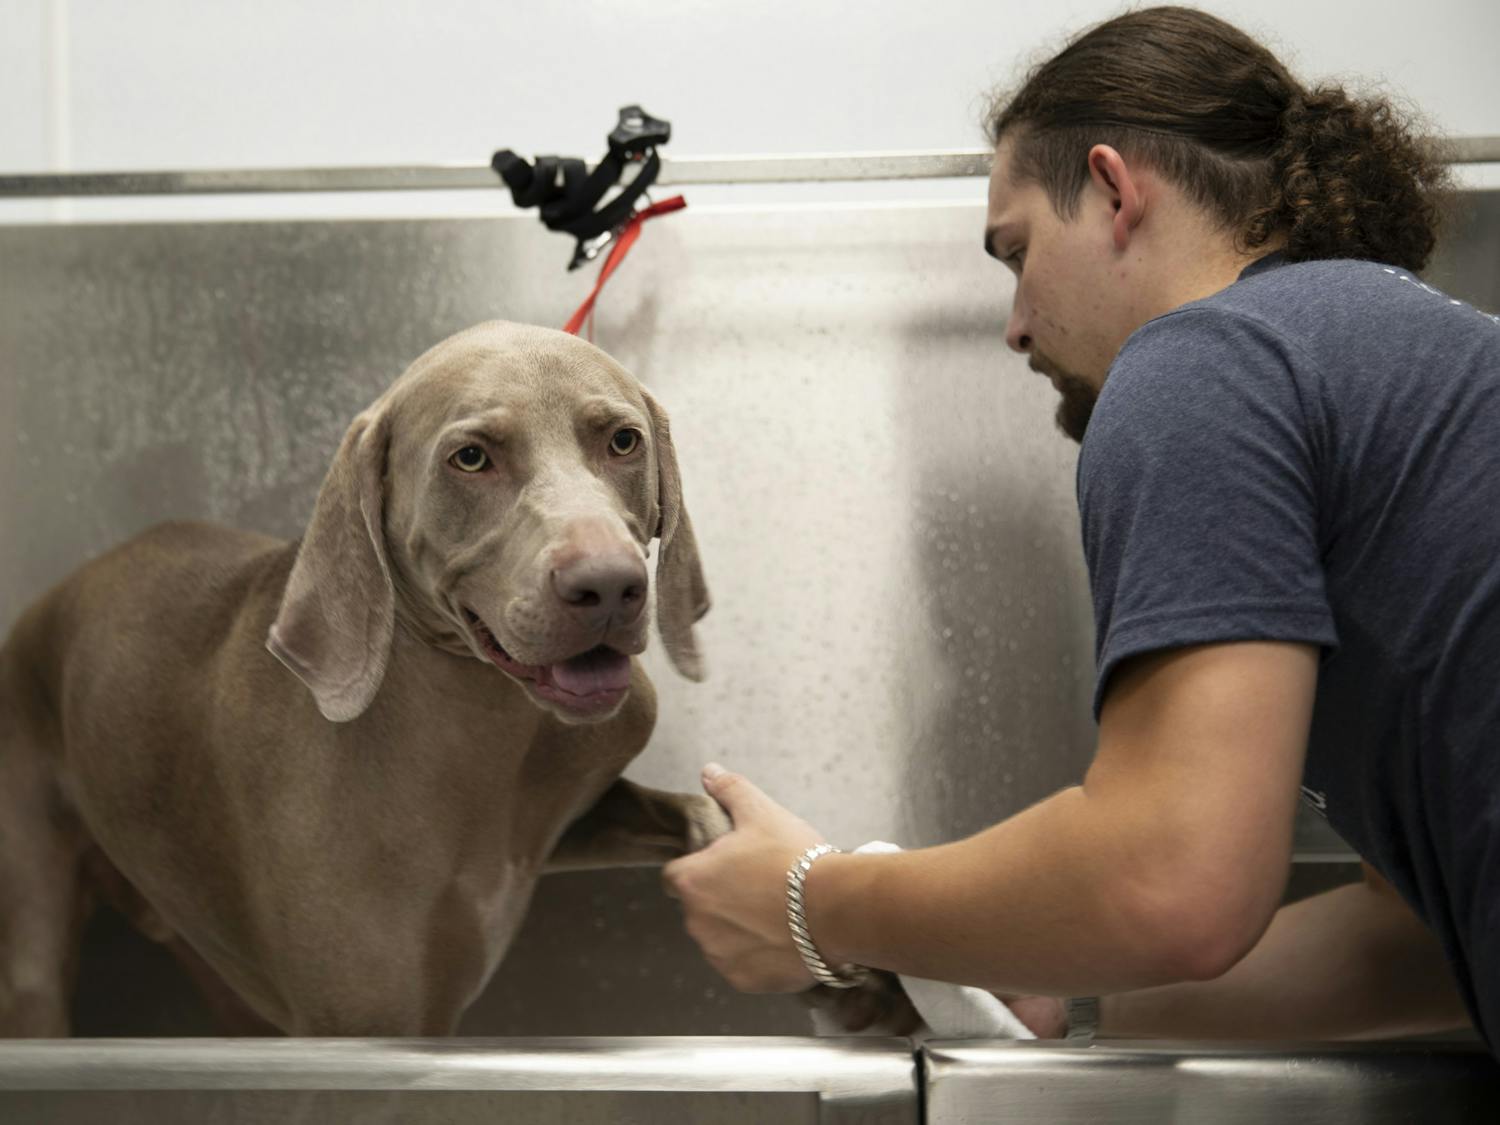 Knox, the dog, (left) smiles as Scenthound pet groomer Marcus Jenkins (right) wipes Knox's paw on Tuesday, May 25, 2021.